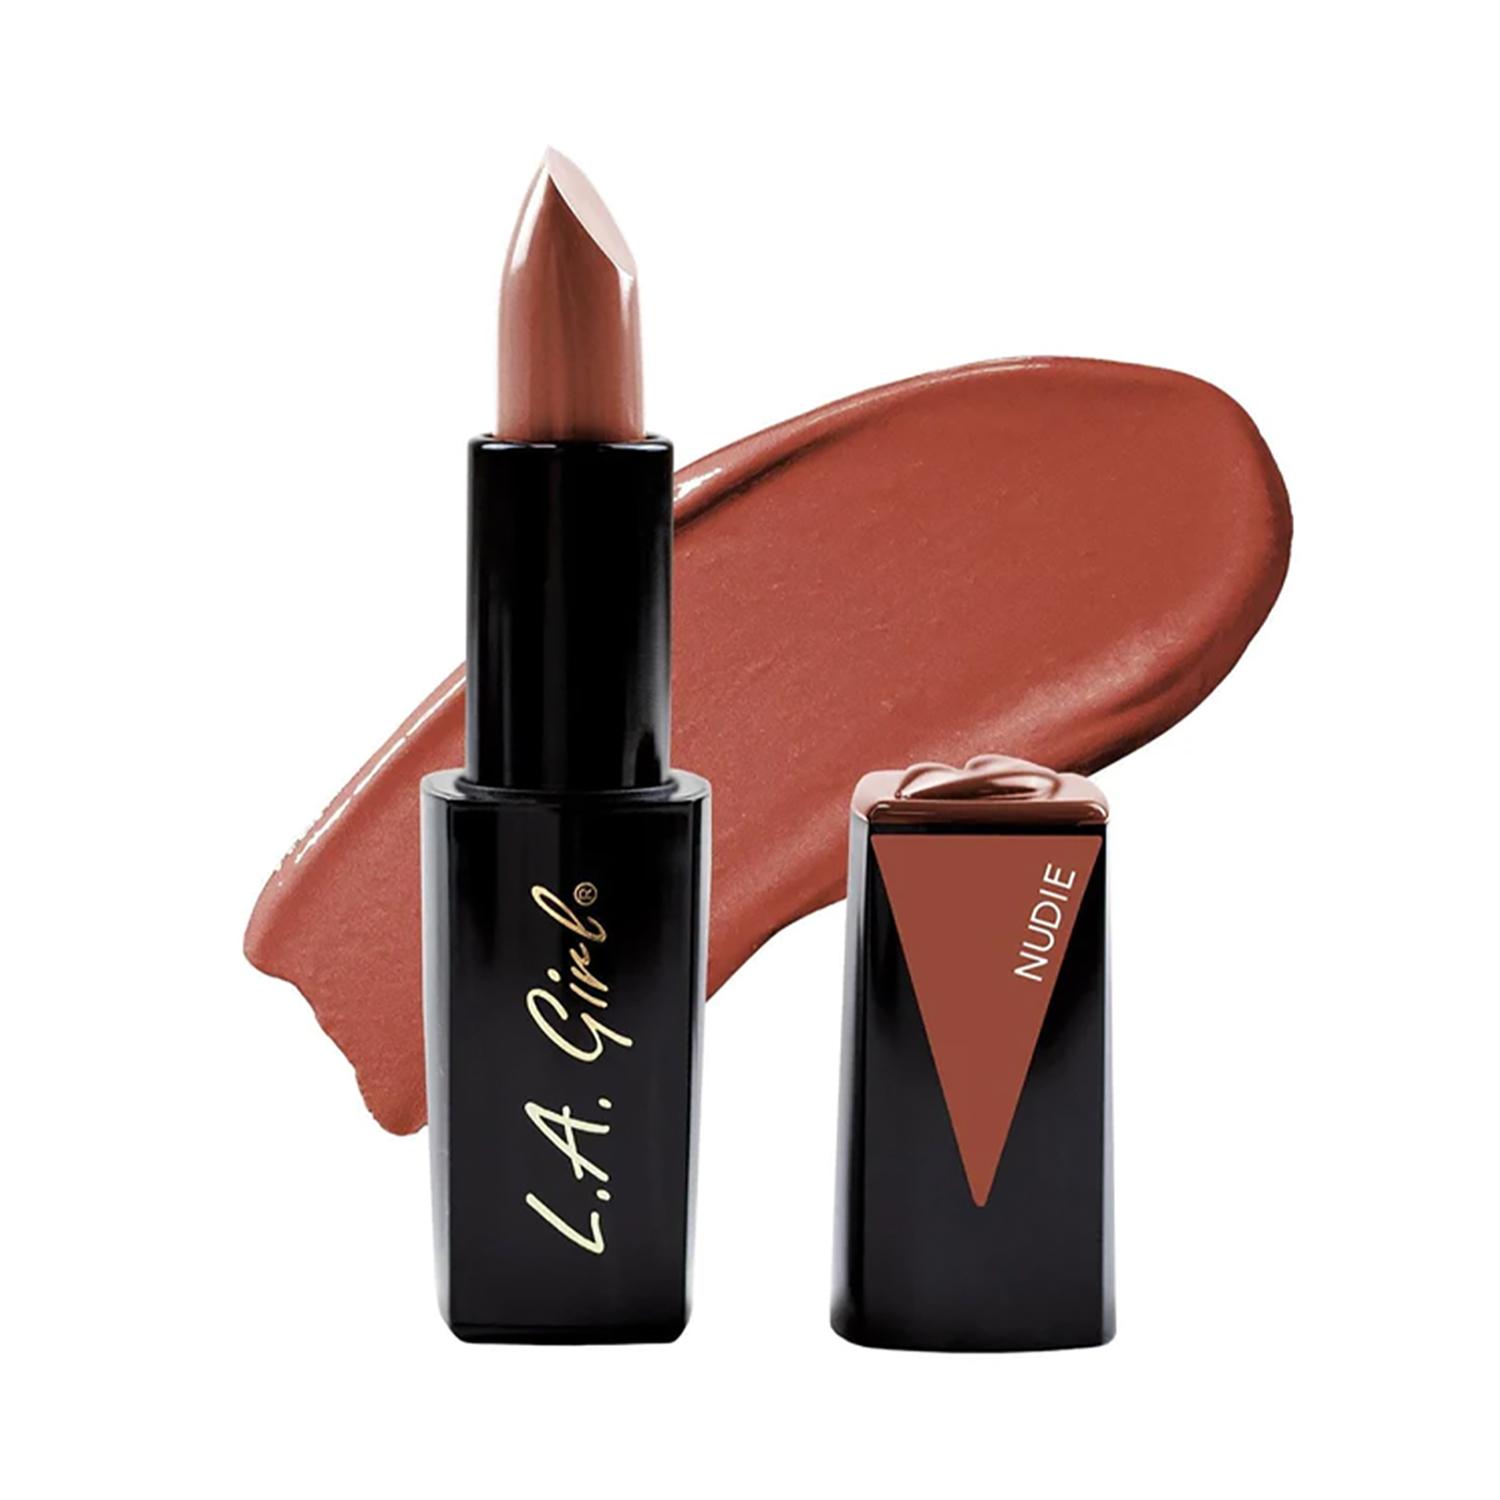 L.A. Girl | L.A. Girl Lip Attraction Lipstick - Nudie (3.2g)